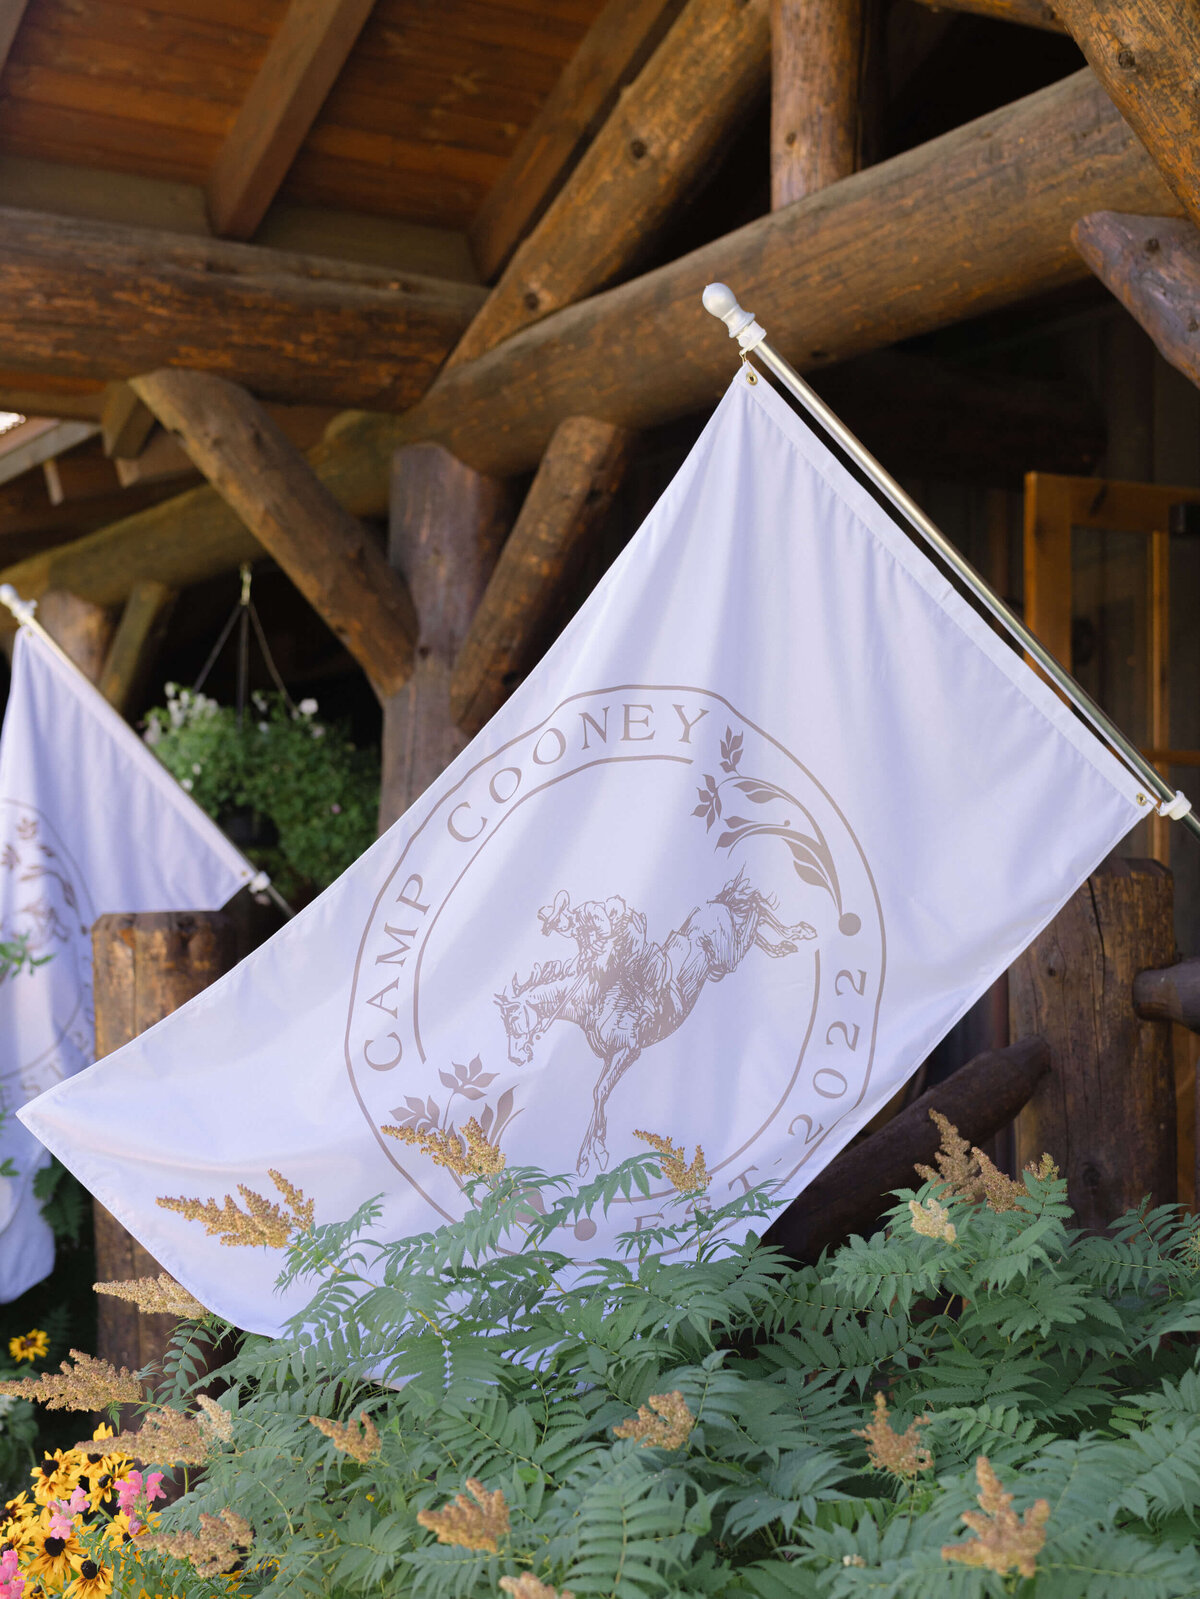 25-KT-Merry-Photography-Western-Wedding-Camp-Cooney-Flag